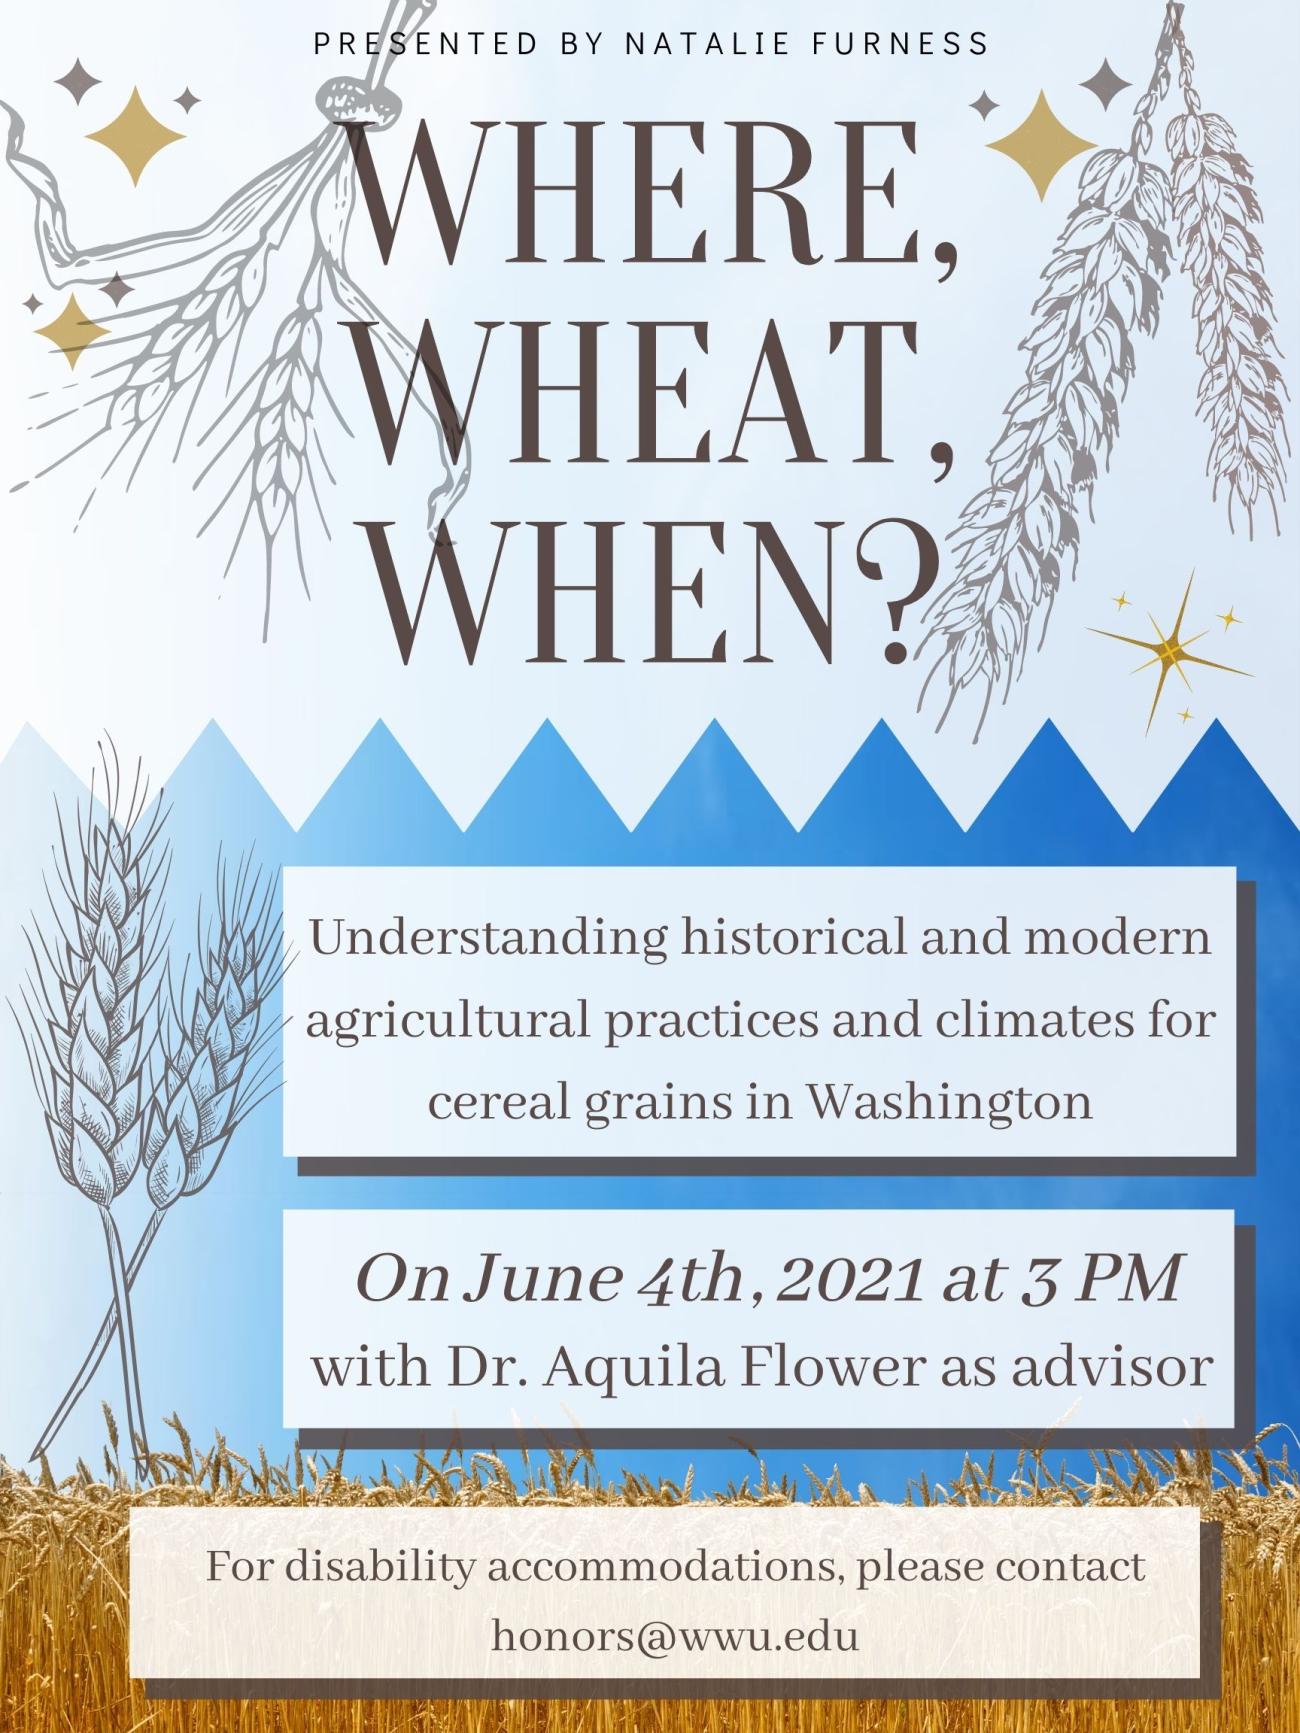 At the bottom is a photo of a wheat growing against a blue sky. Additional wheat graphics decorate around the text, which reads: "Where, Wheat, When? Understanding historical and modern agricultural practices and climates for cereal grains in Washington. Presented by Natalie Furness. On June 4th, 2021 at 3 PM, with Dr. Aquila Flower as advisor. For disability accommodations, please contact honors@wwu.edu". 